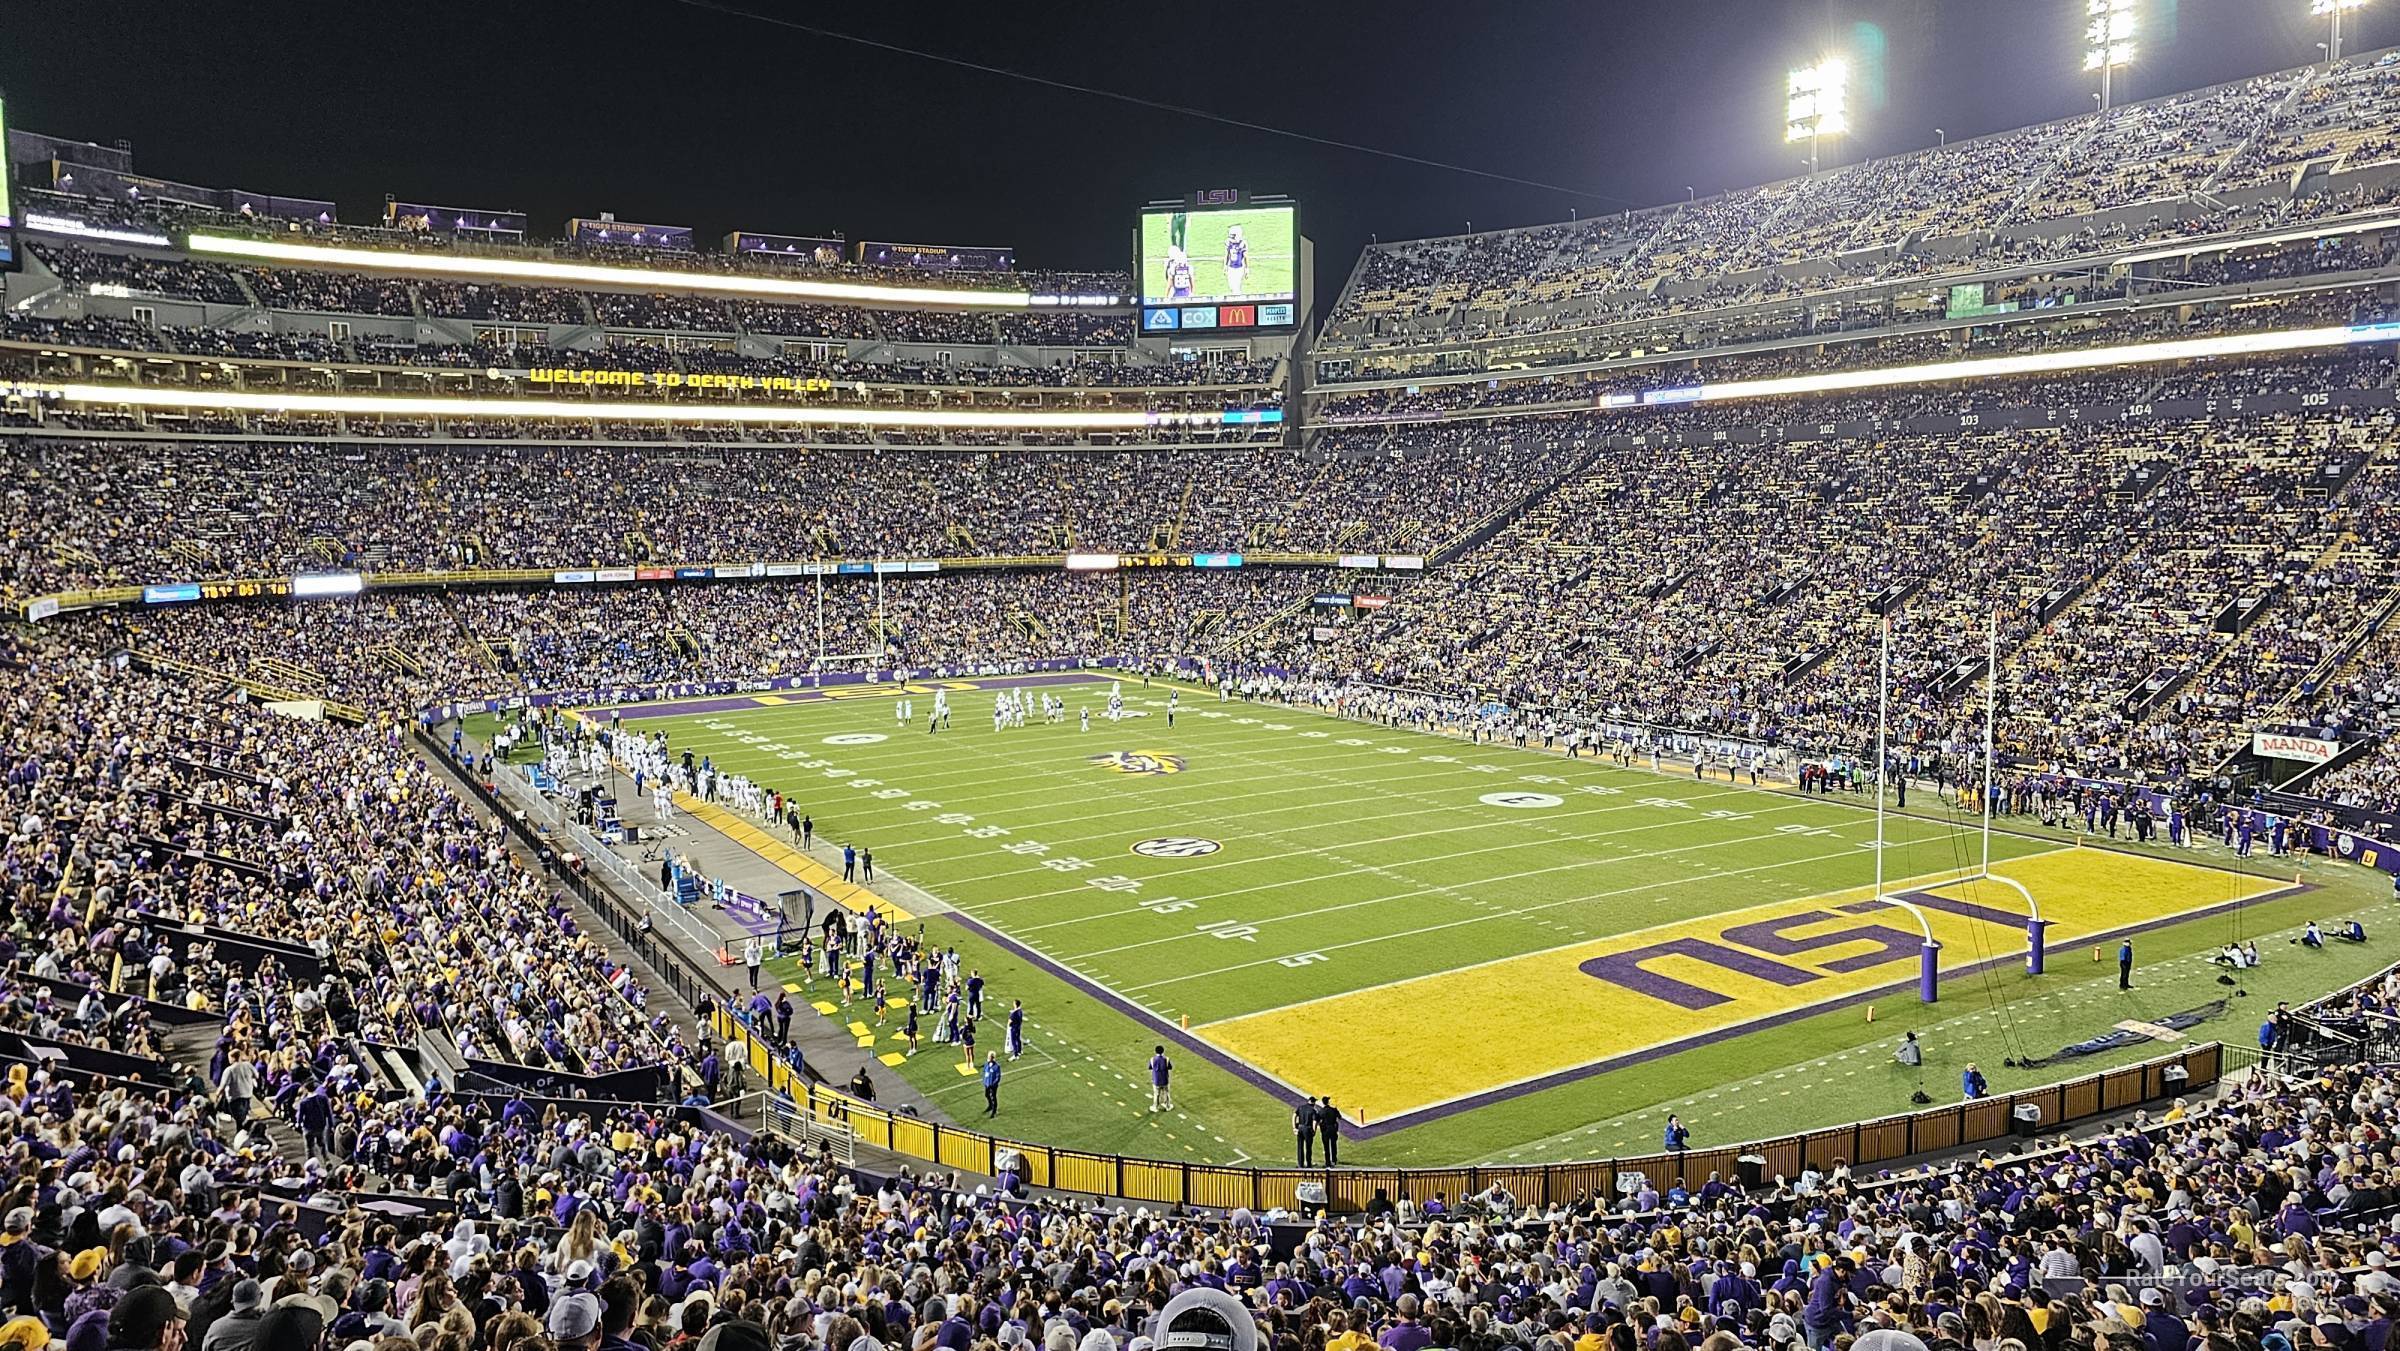 section 239, row 1 seat view  - tiger stadium